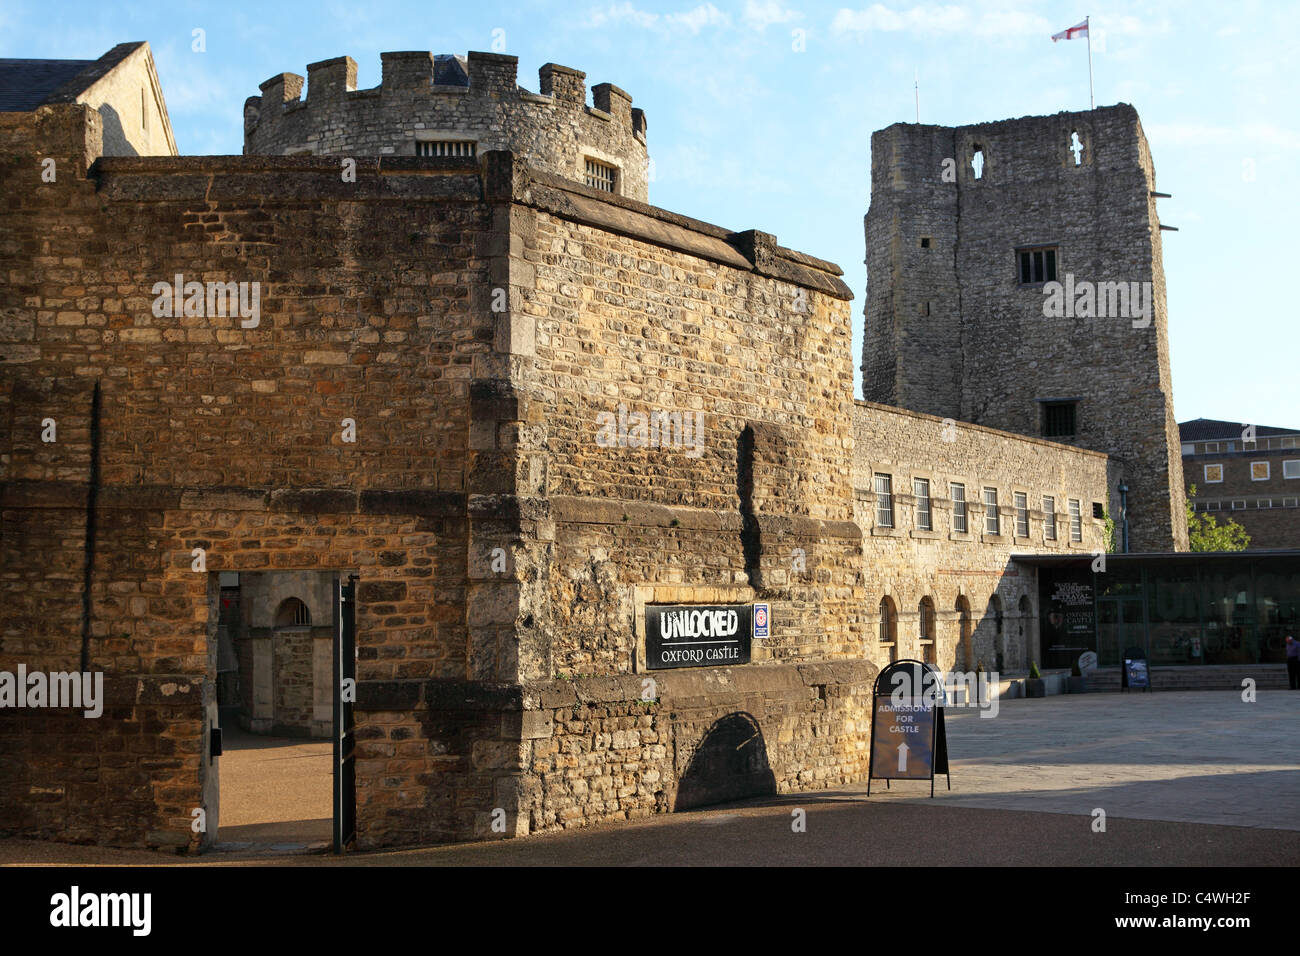 Oxford Castle in Oxford, England. Stock Photo